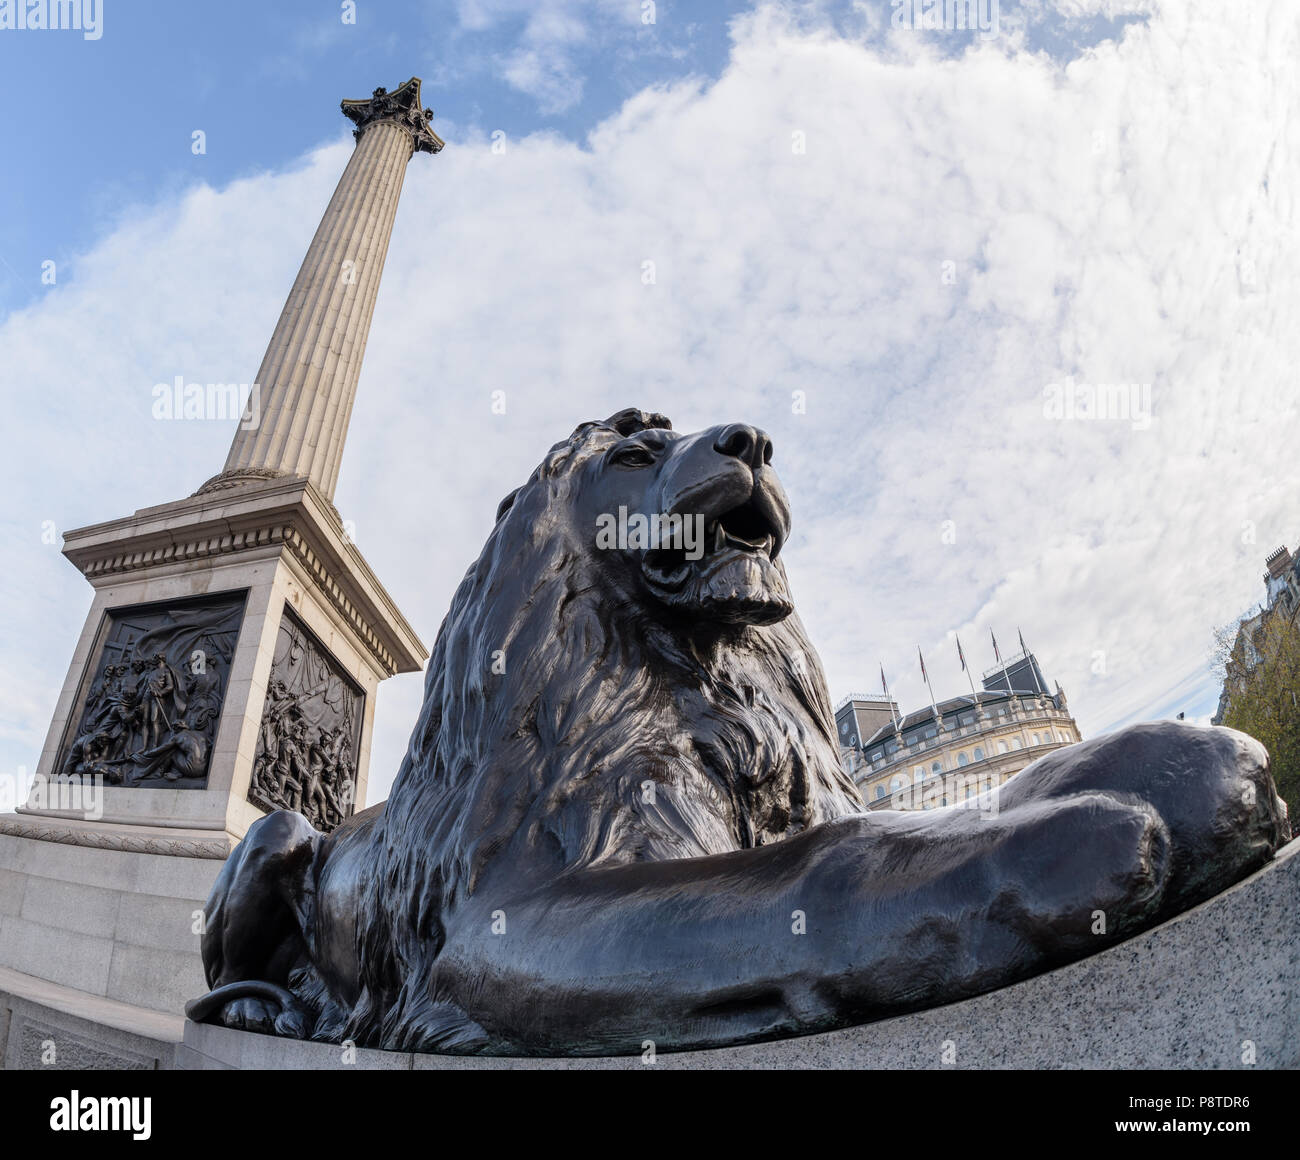 Looking up at one of the Landseer lions and Nelson's Column in Trafalgar Square, London Stock Photo